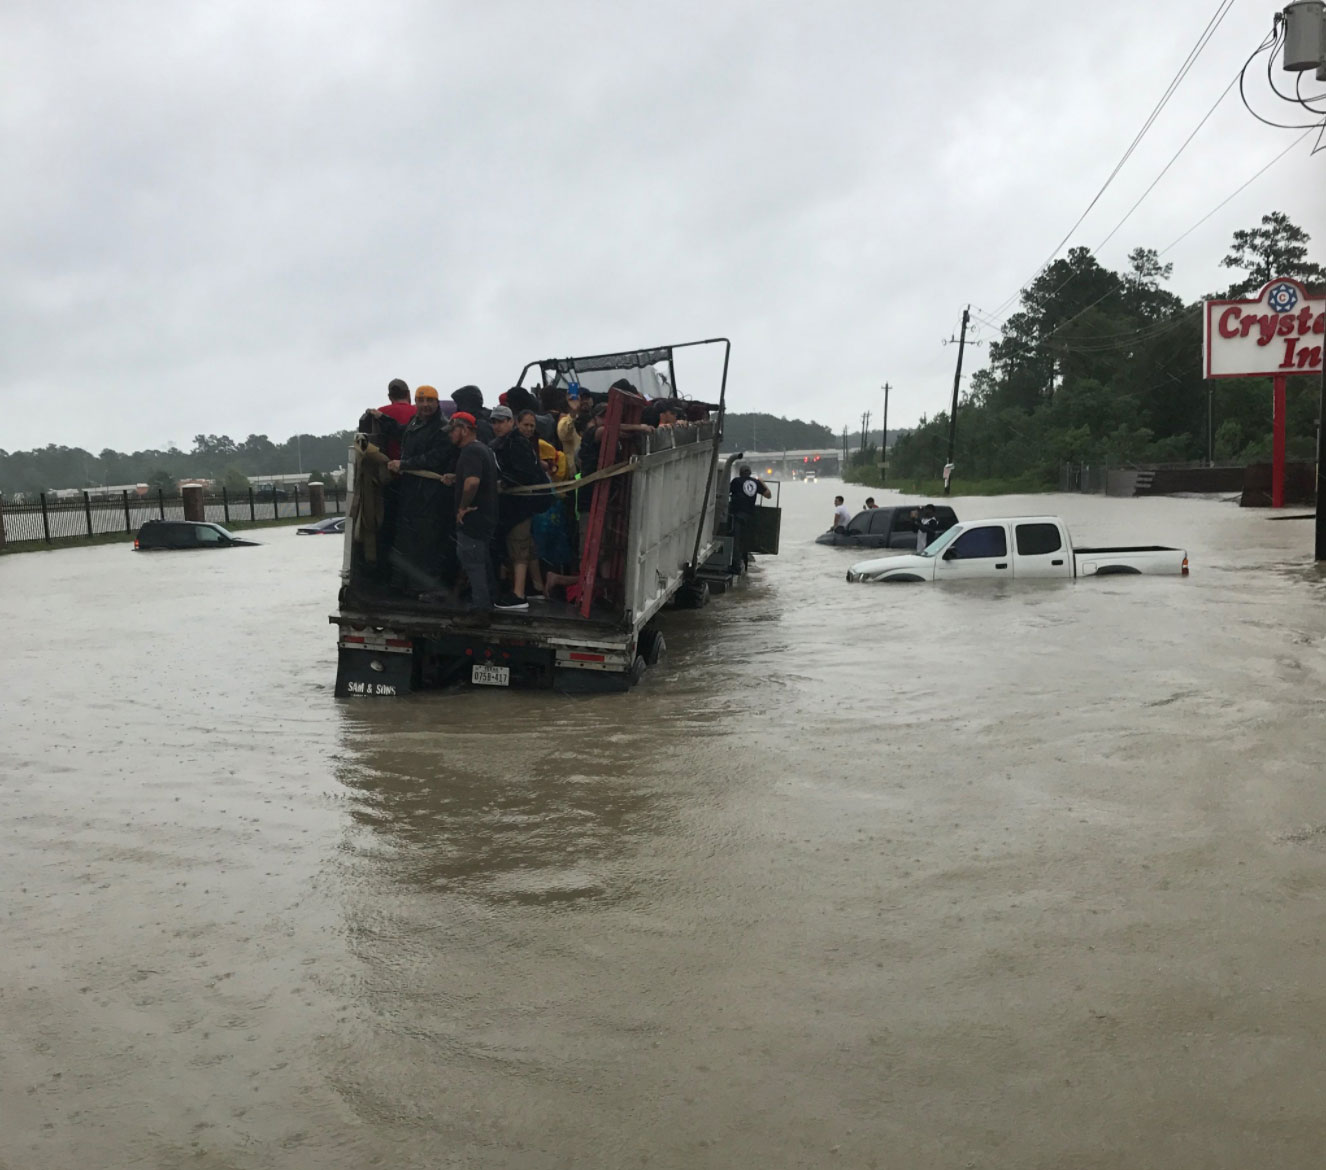 <div class='meta'><div class='origin-logo' data-origin='none'></div><span class='caption-text' data-credit='SheriffEd_HCSO/Twitter'>The Harris County Sheriff posted this photo of residents rescued in a convoy while helping out with rescues on Tidwell Rd in Houston.</span></div>